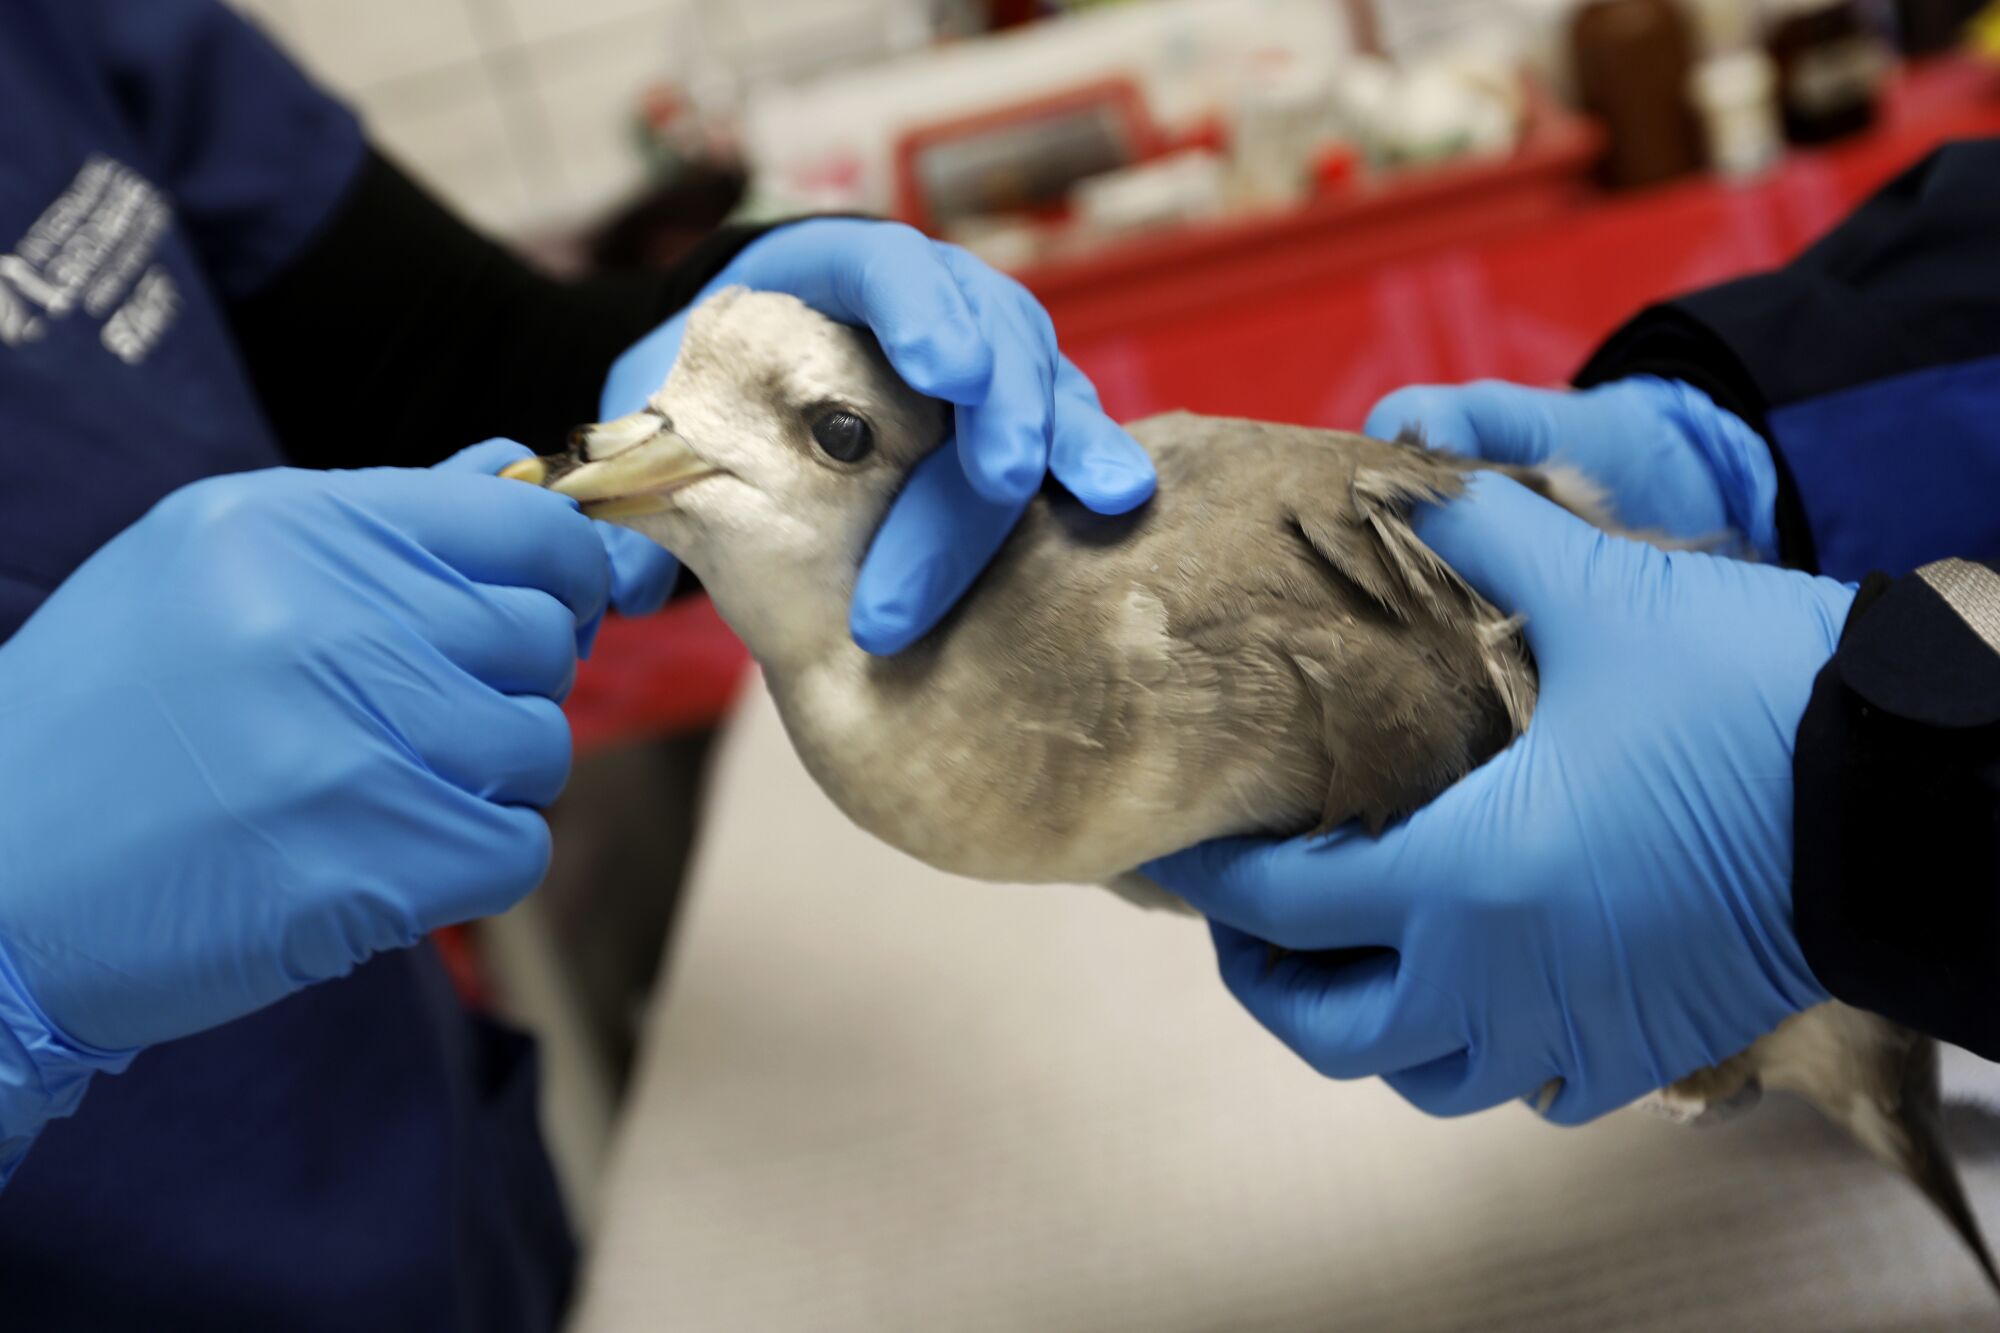 Two wildlife rescuers holding a sick fulmar check its vitals.